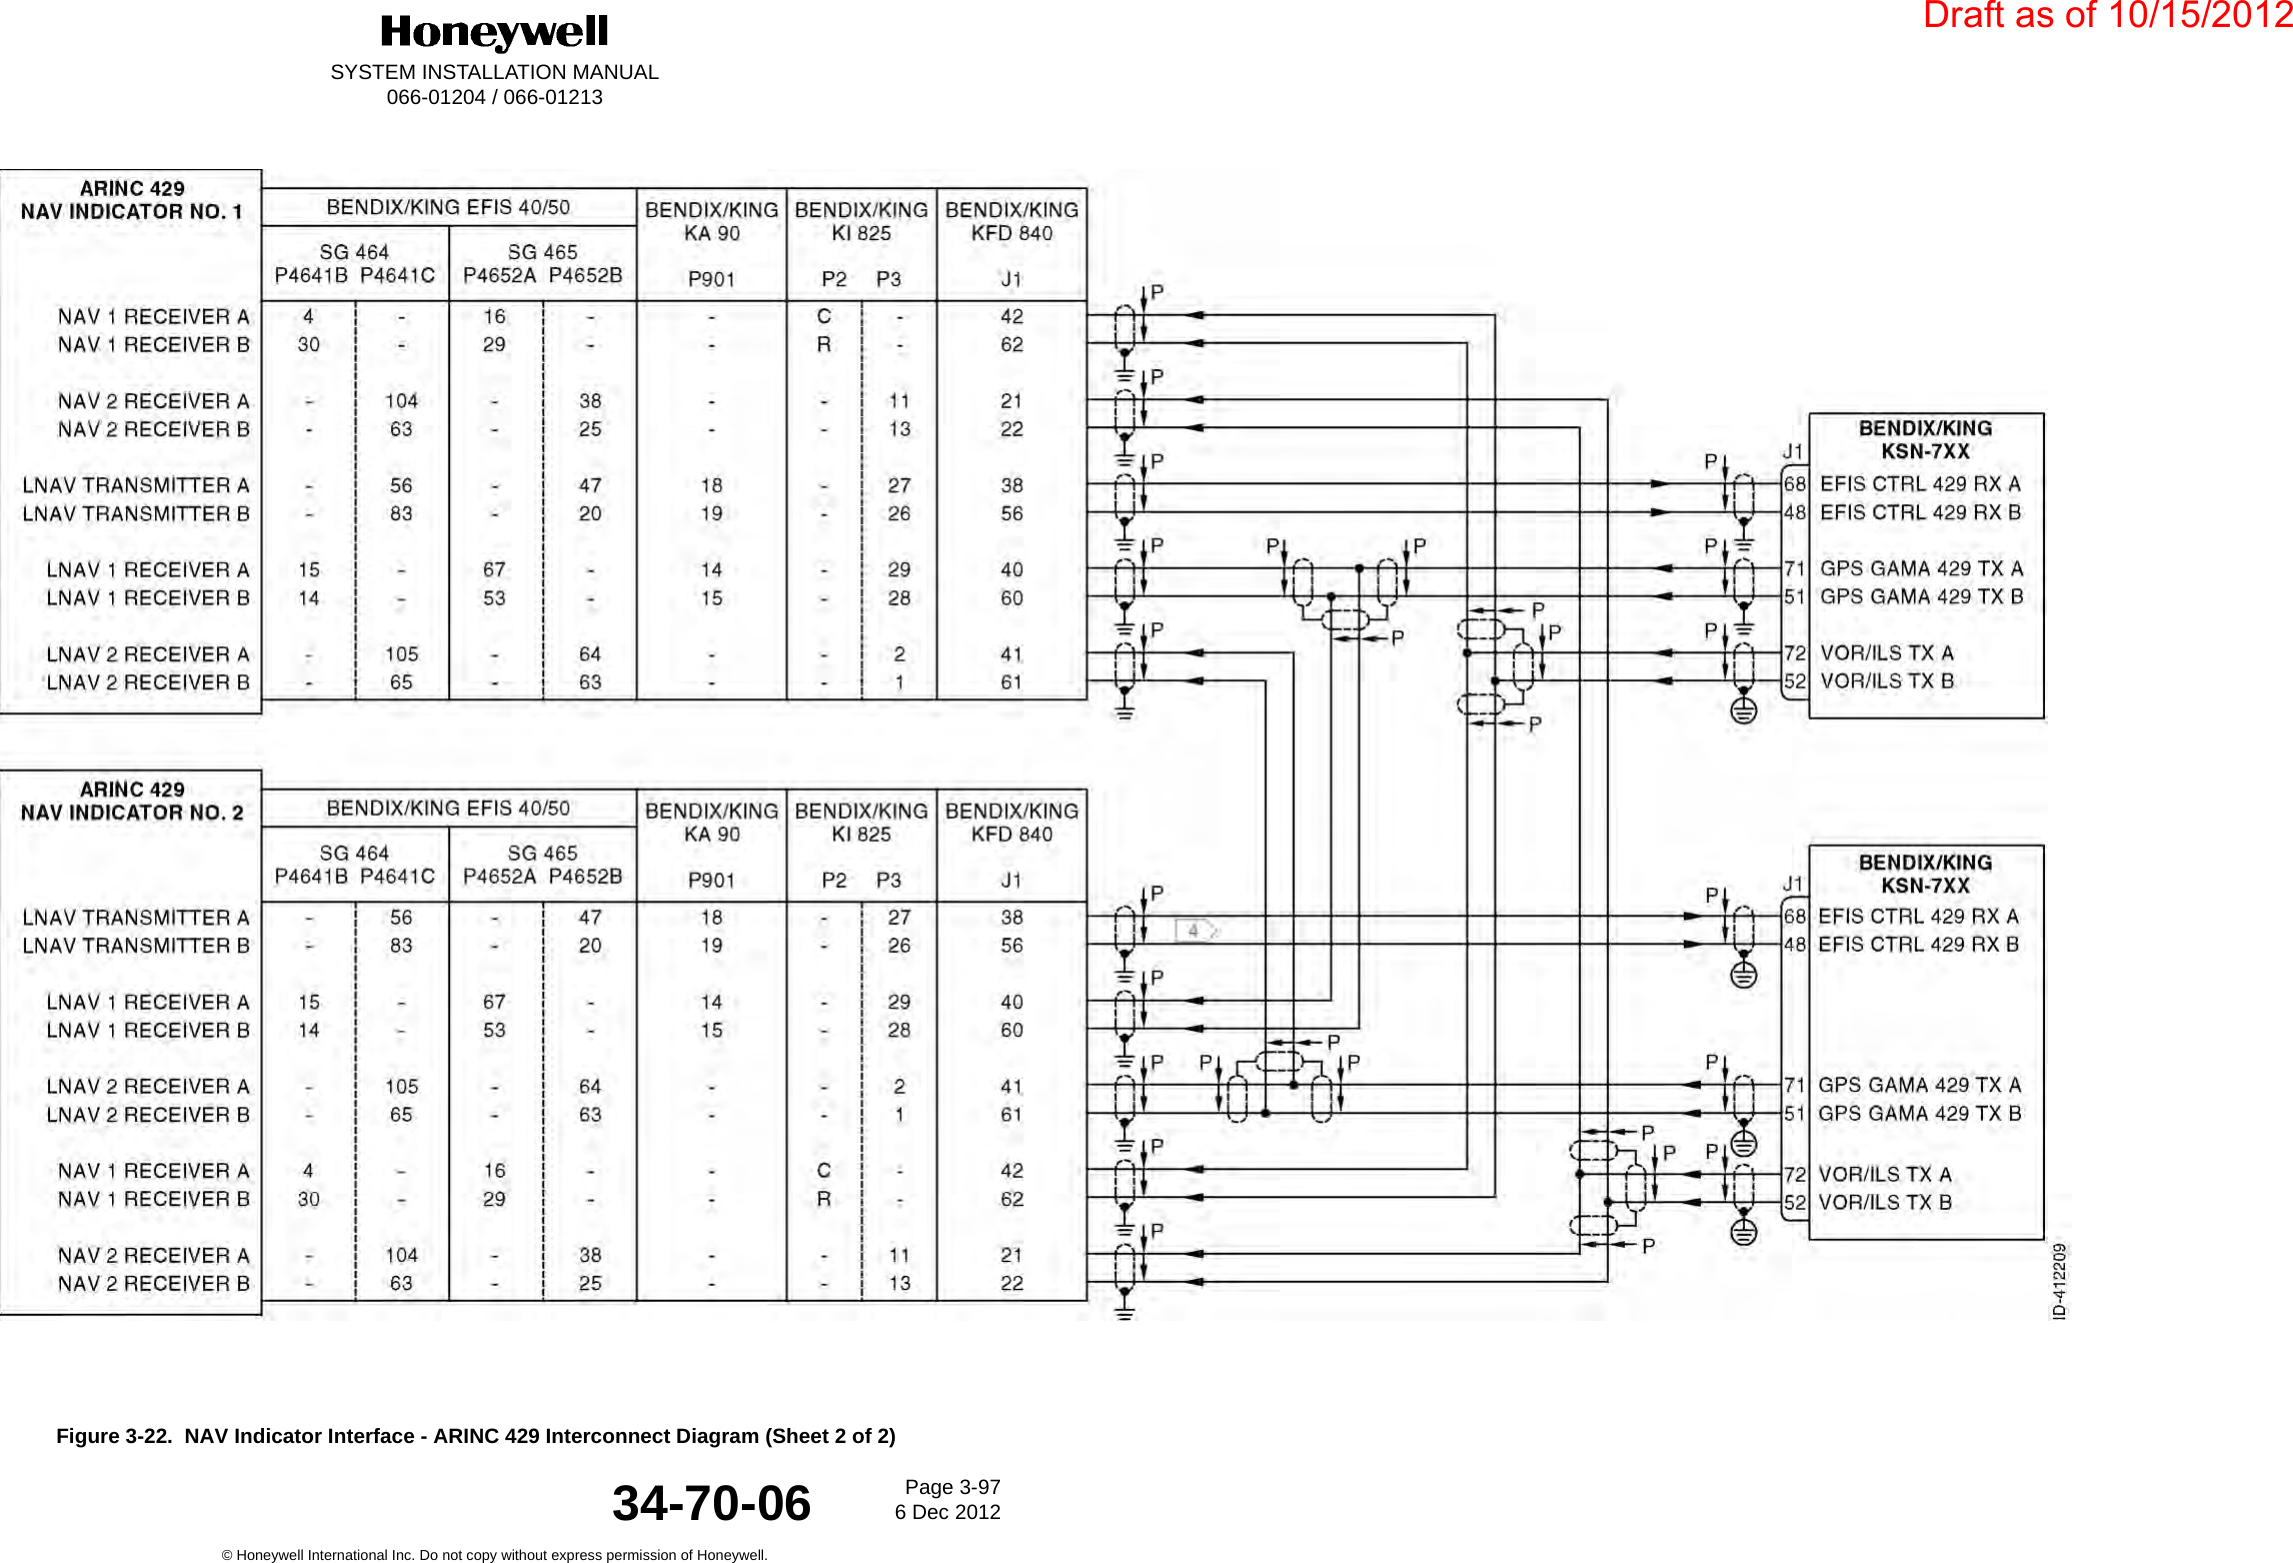 DraftSYSTEM INSTALLATION MANUAL066-01204 / 066-01213Page 3-976 Dec 2012© Honeywell International Inc. Do not copy without express permission of Honeywell.34-70-06Figure 3-22.  NAV Indicator Interface - ARINC 429 Interconnect Diagram (Sheet 2 of 2)Draft as of 10/15/2012